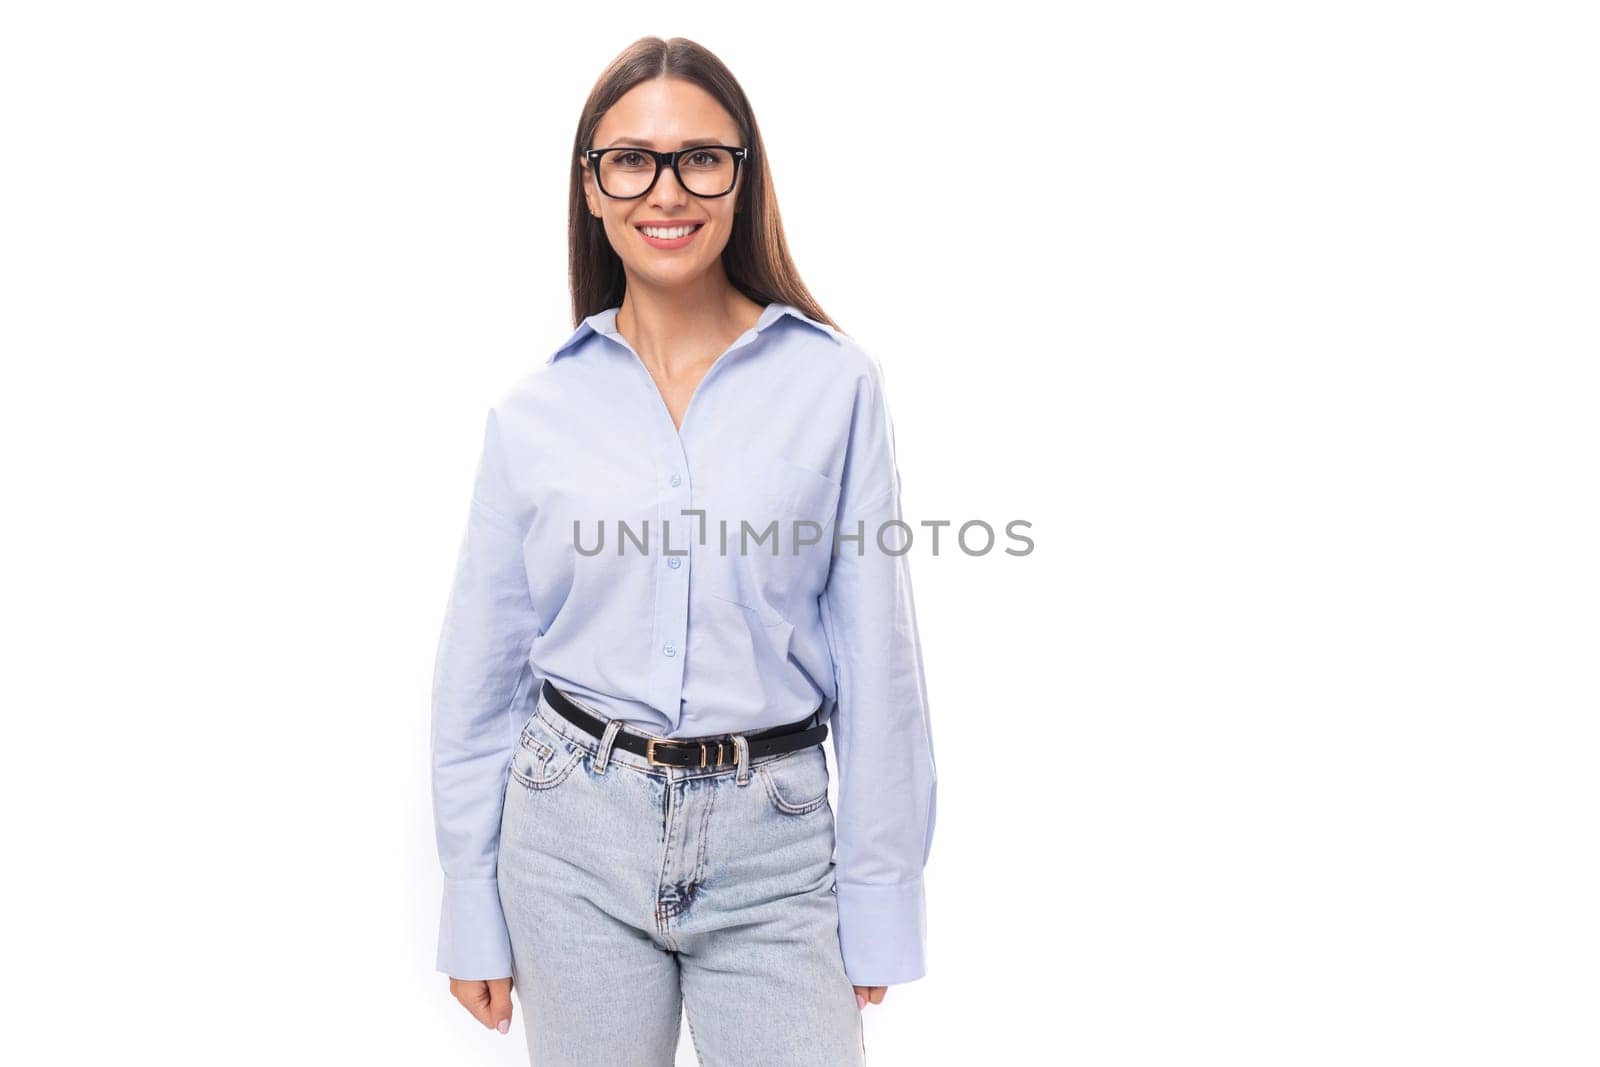 young pretty european business woman with long black hair dressed in a blue blouse and glasses on a white background with copy space.